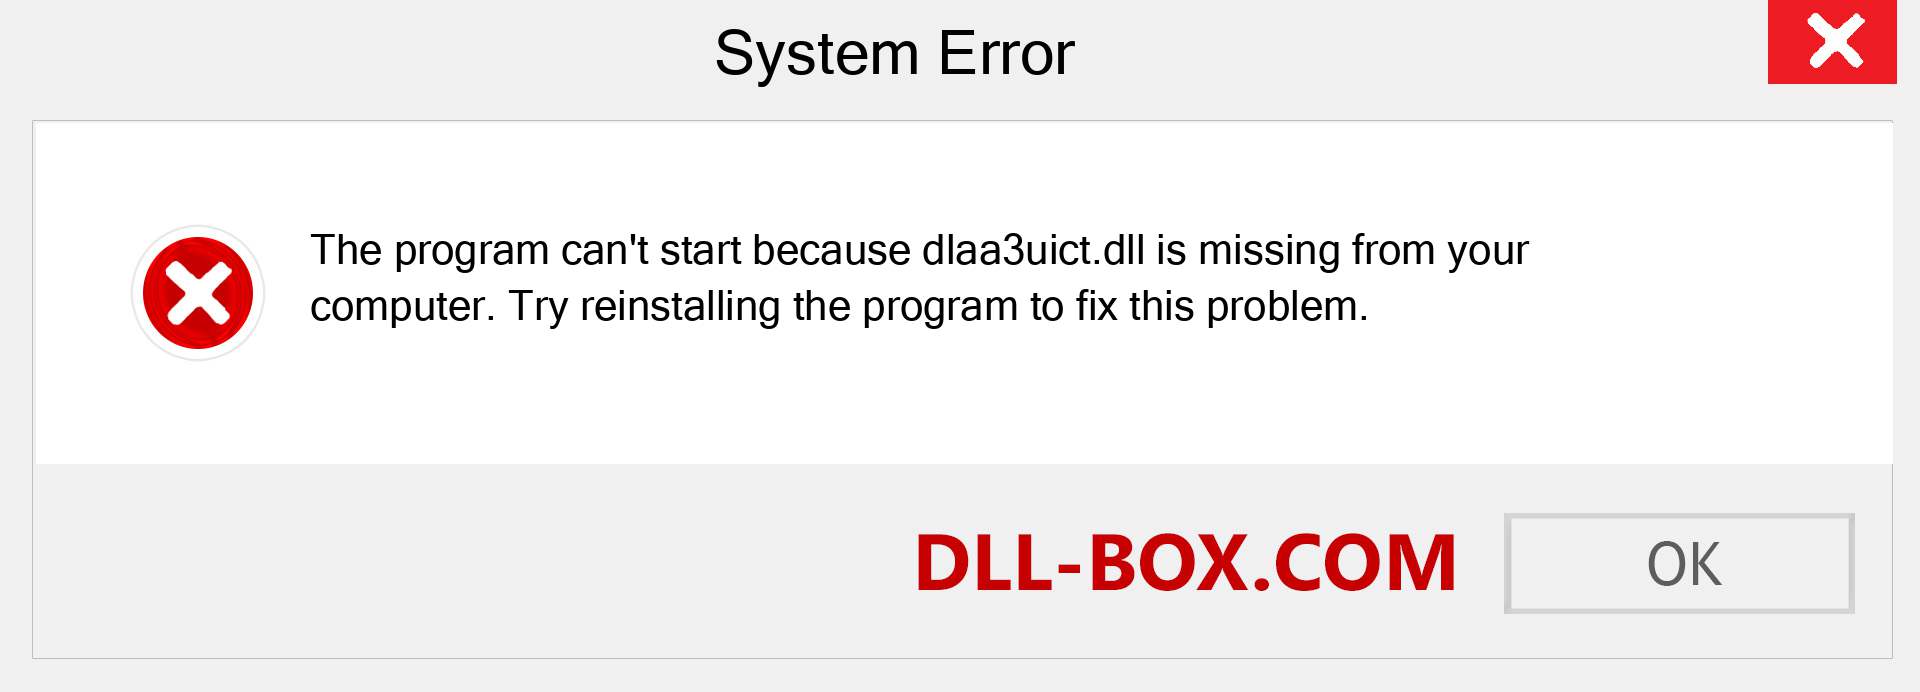  dlaa3uict.dll file is missing?. Download for Windows 7, 8, 10 - Fix  dlaa3uict dll Missing Error on Windows, photos, images